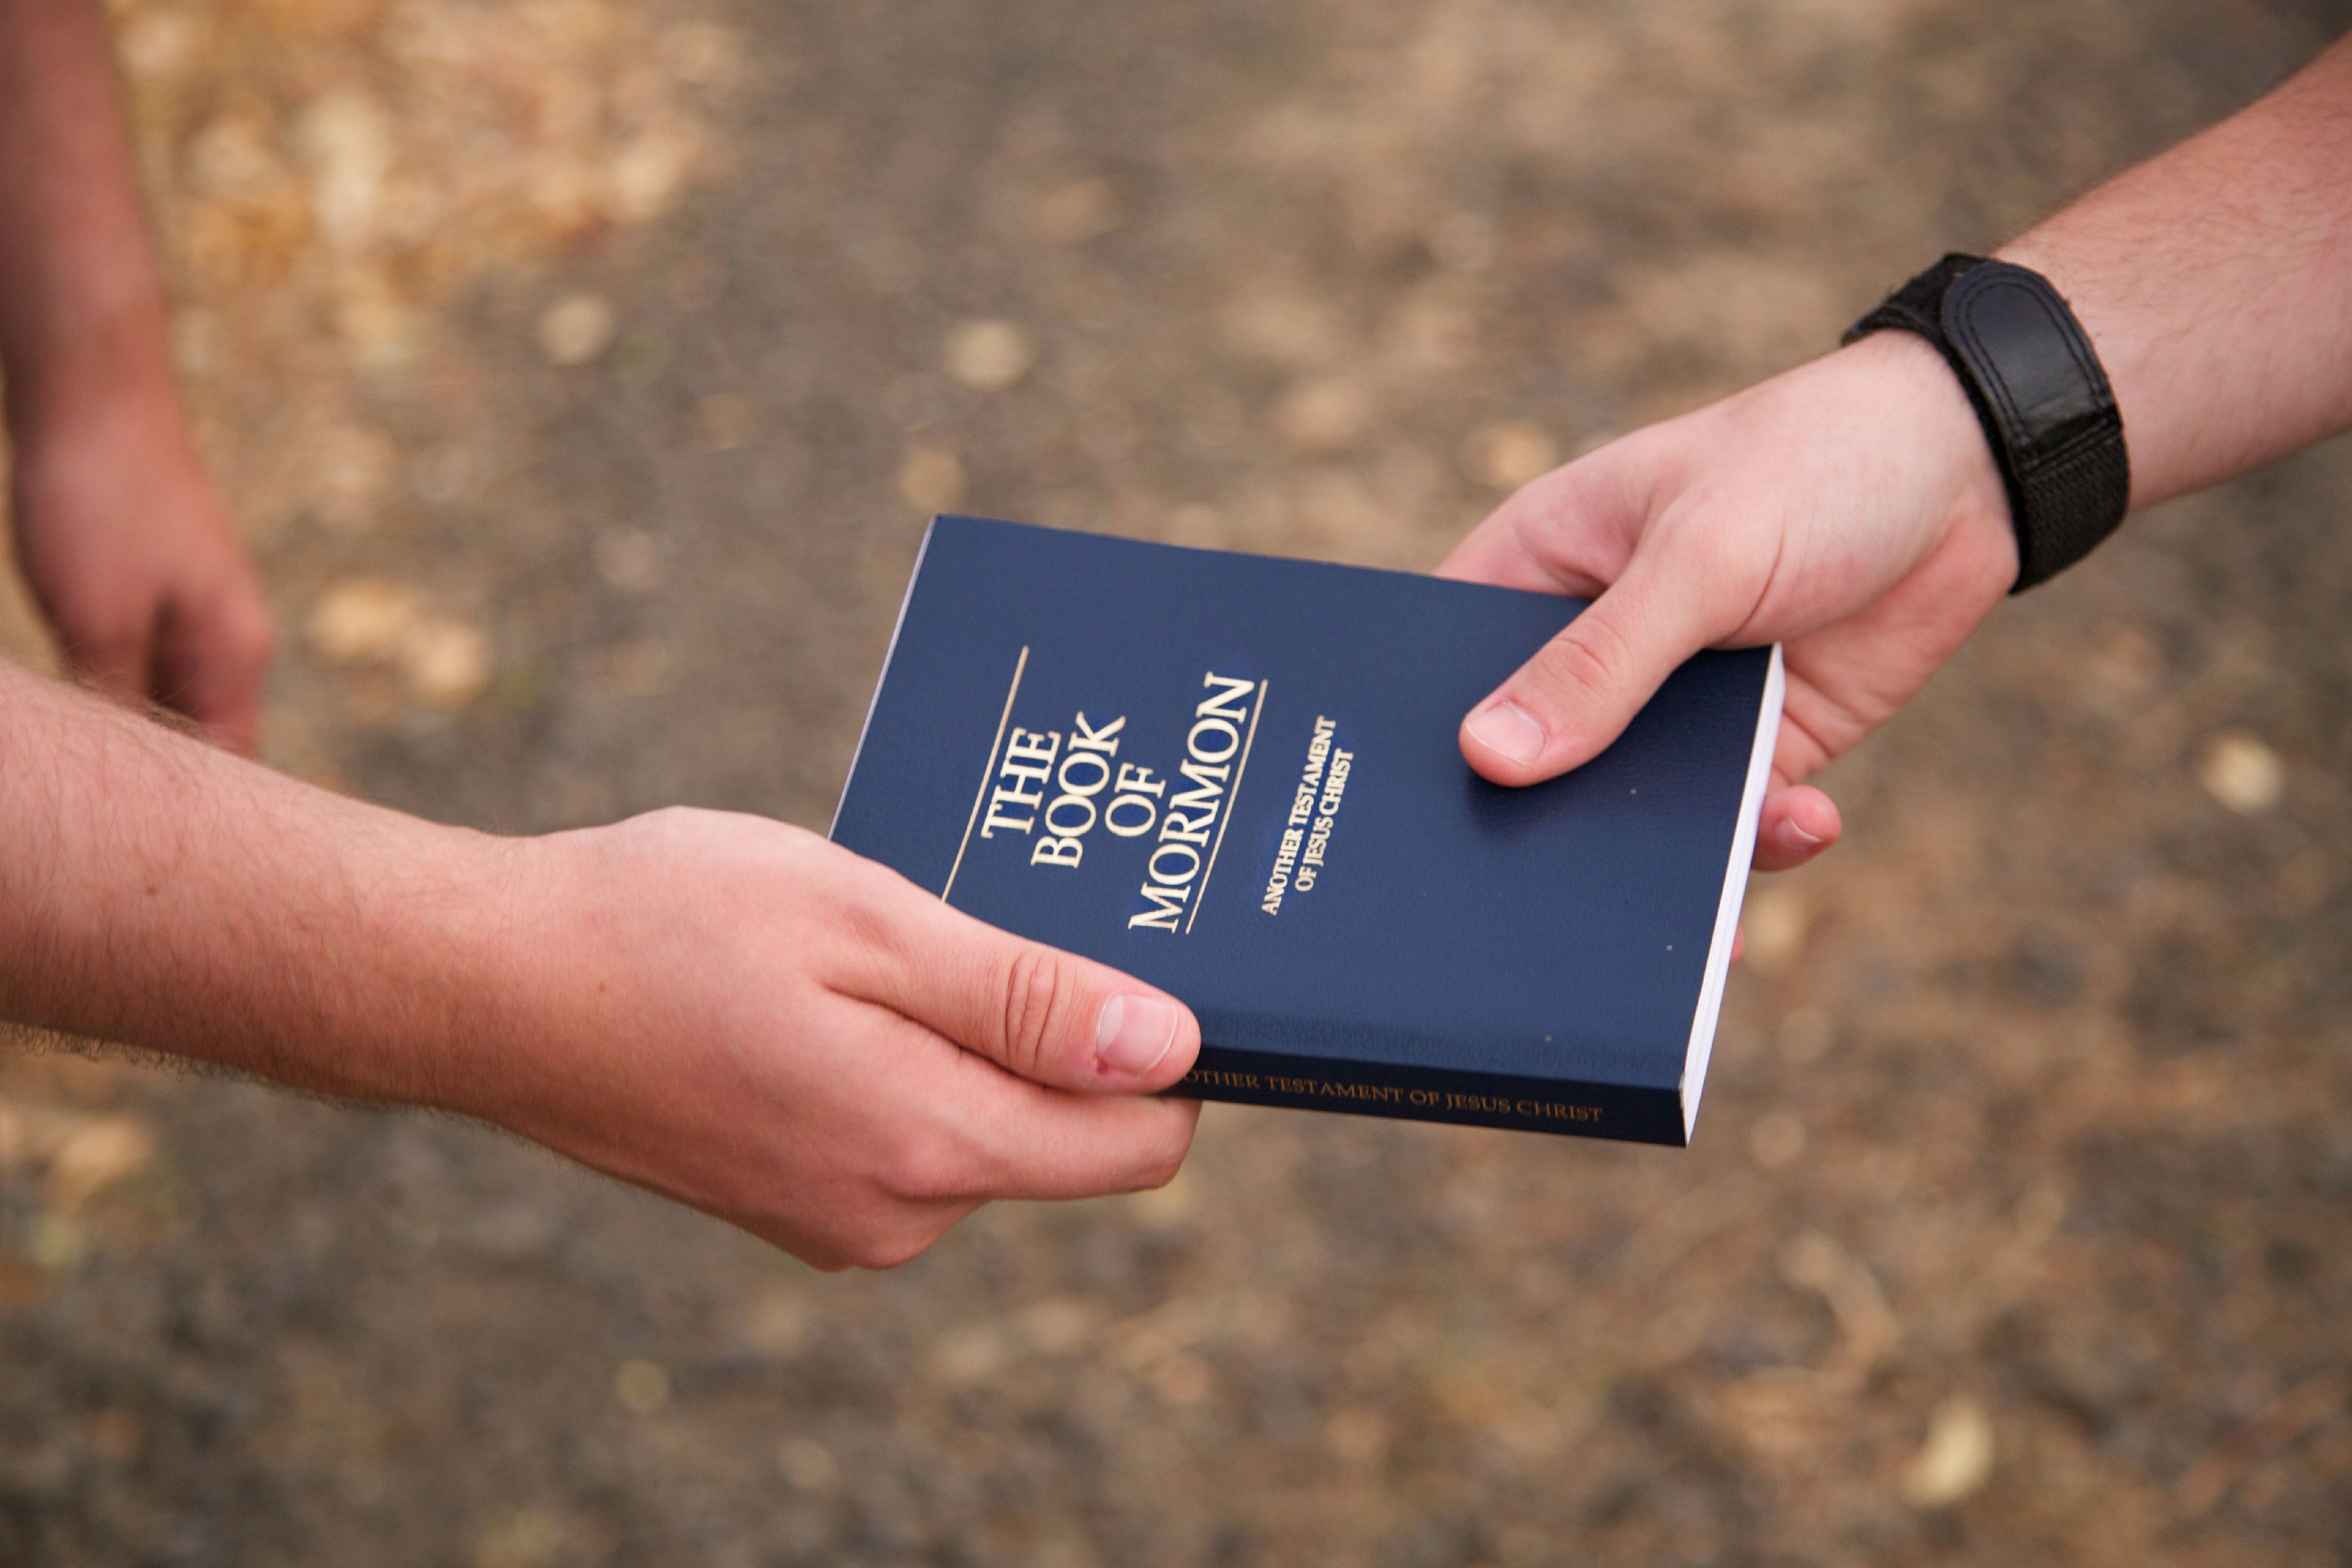 A hand holding a Book of Mormon and giving it to another person.